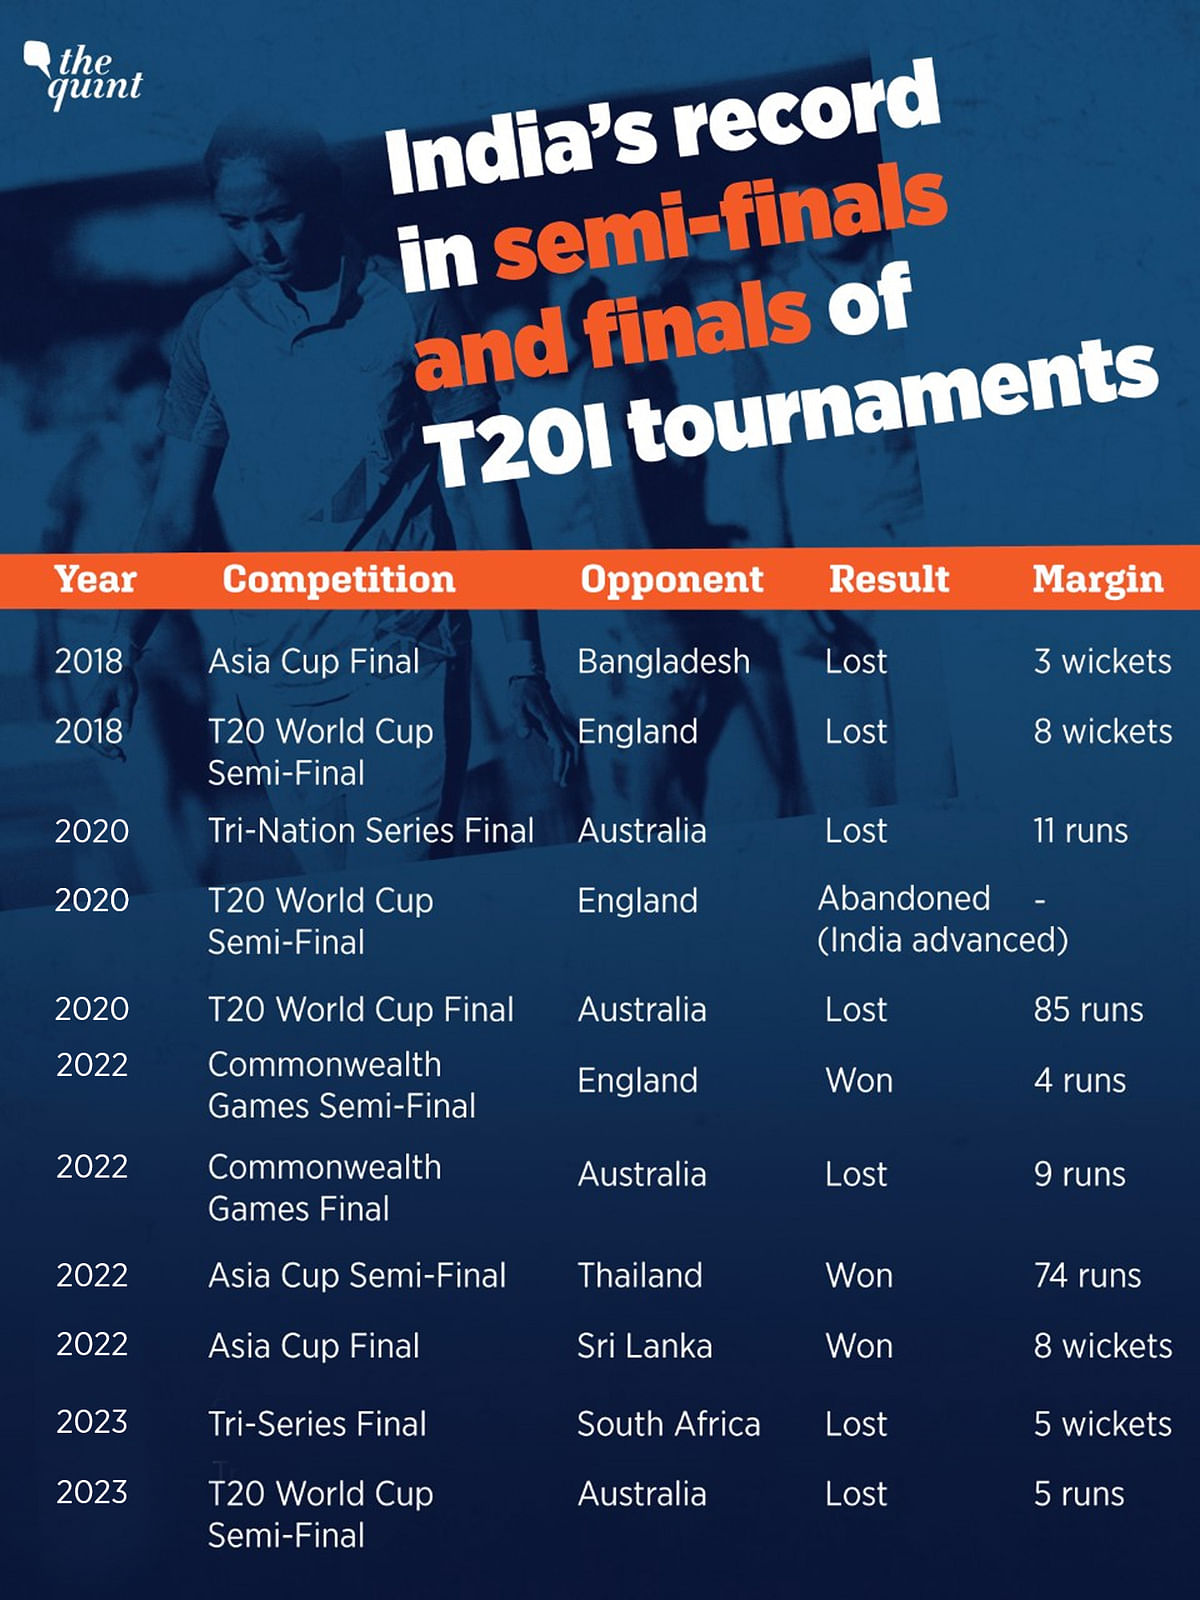 Women's T20 WC 2023: Since 2018, the Indian women's team has won only three of the ten completed T20I knockout games